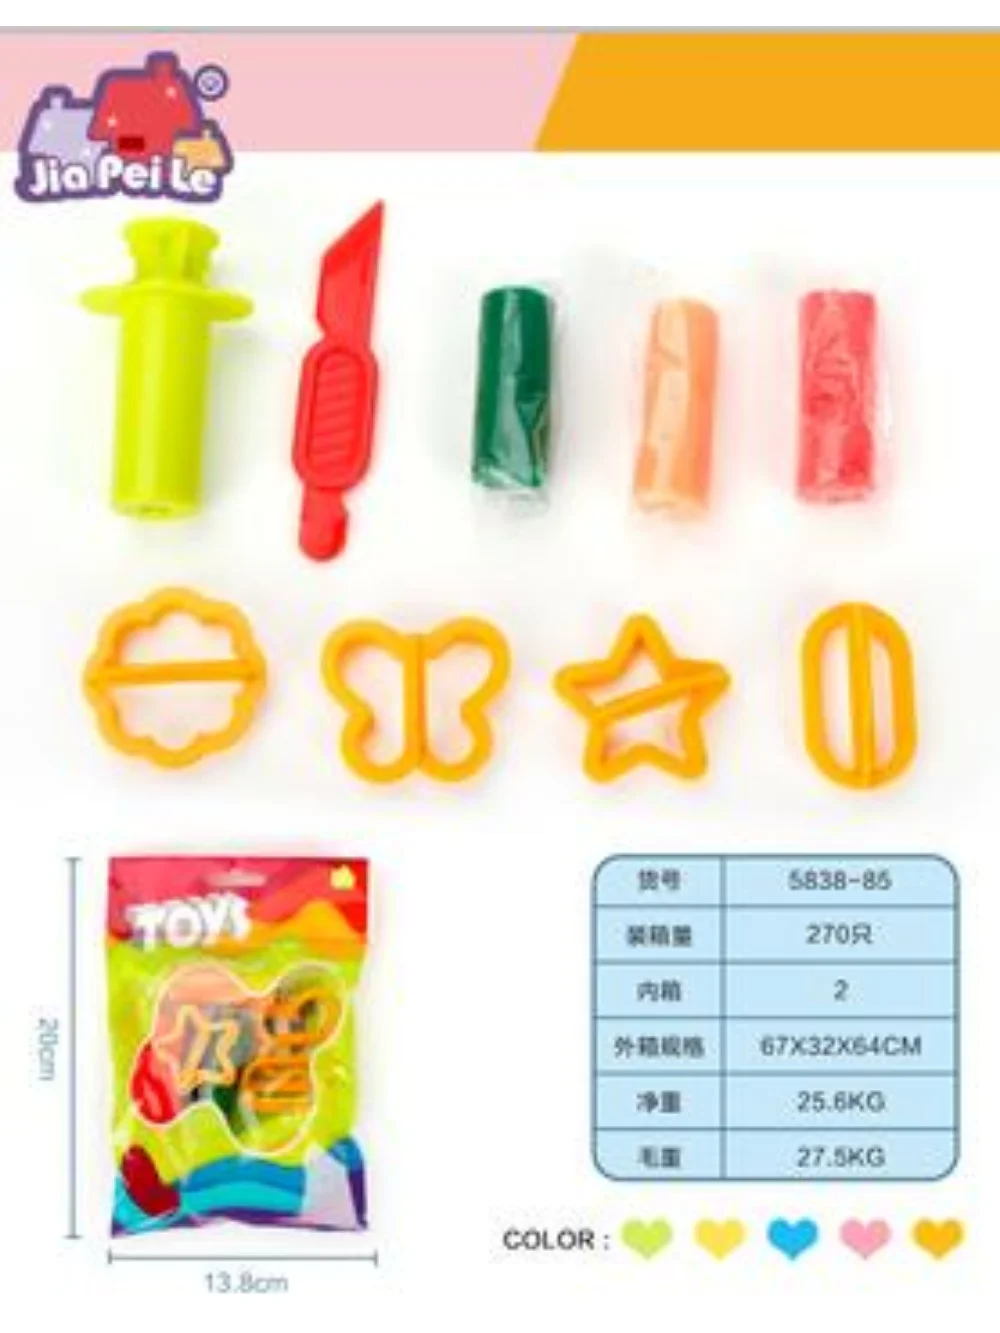 

Charms for Slime Develop Children's Creativity and Imagination Kids Color Clay DIY Plasticine Mold Tool Toy Set